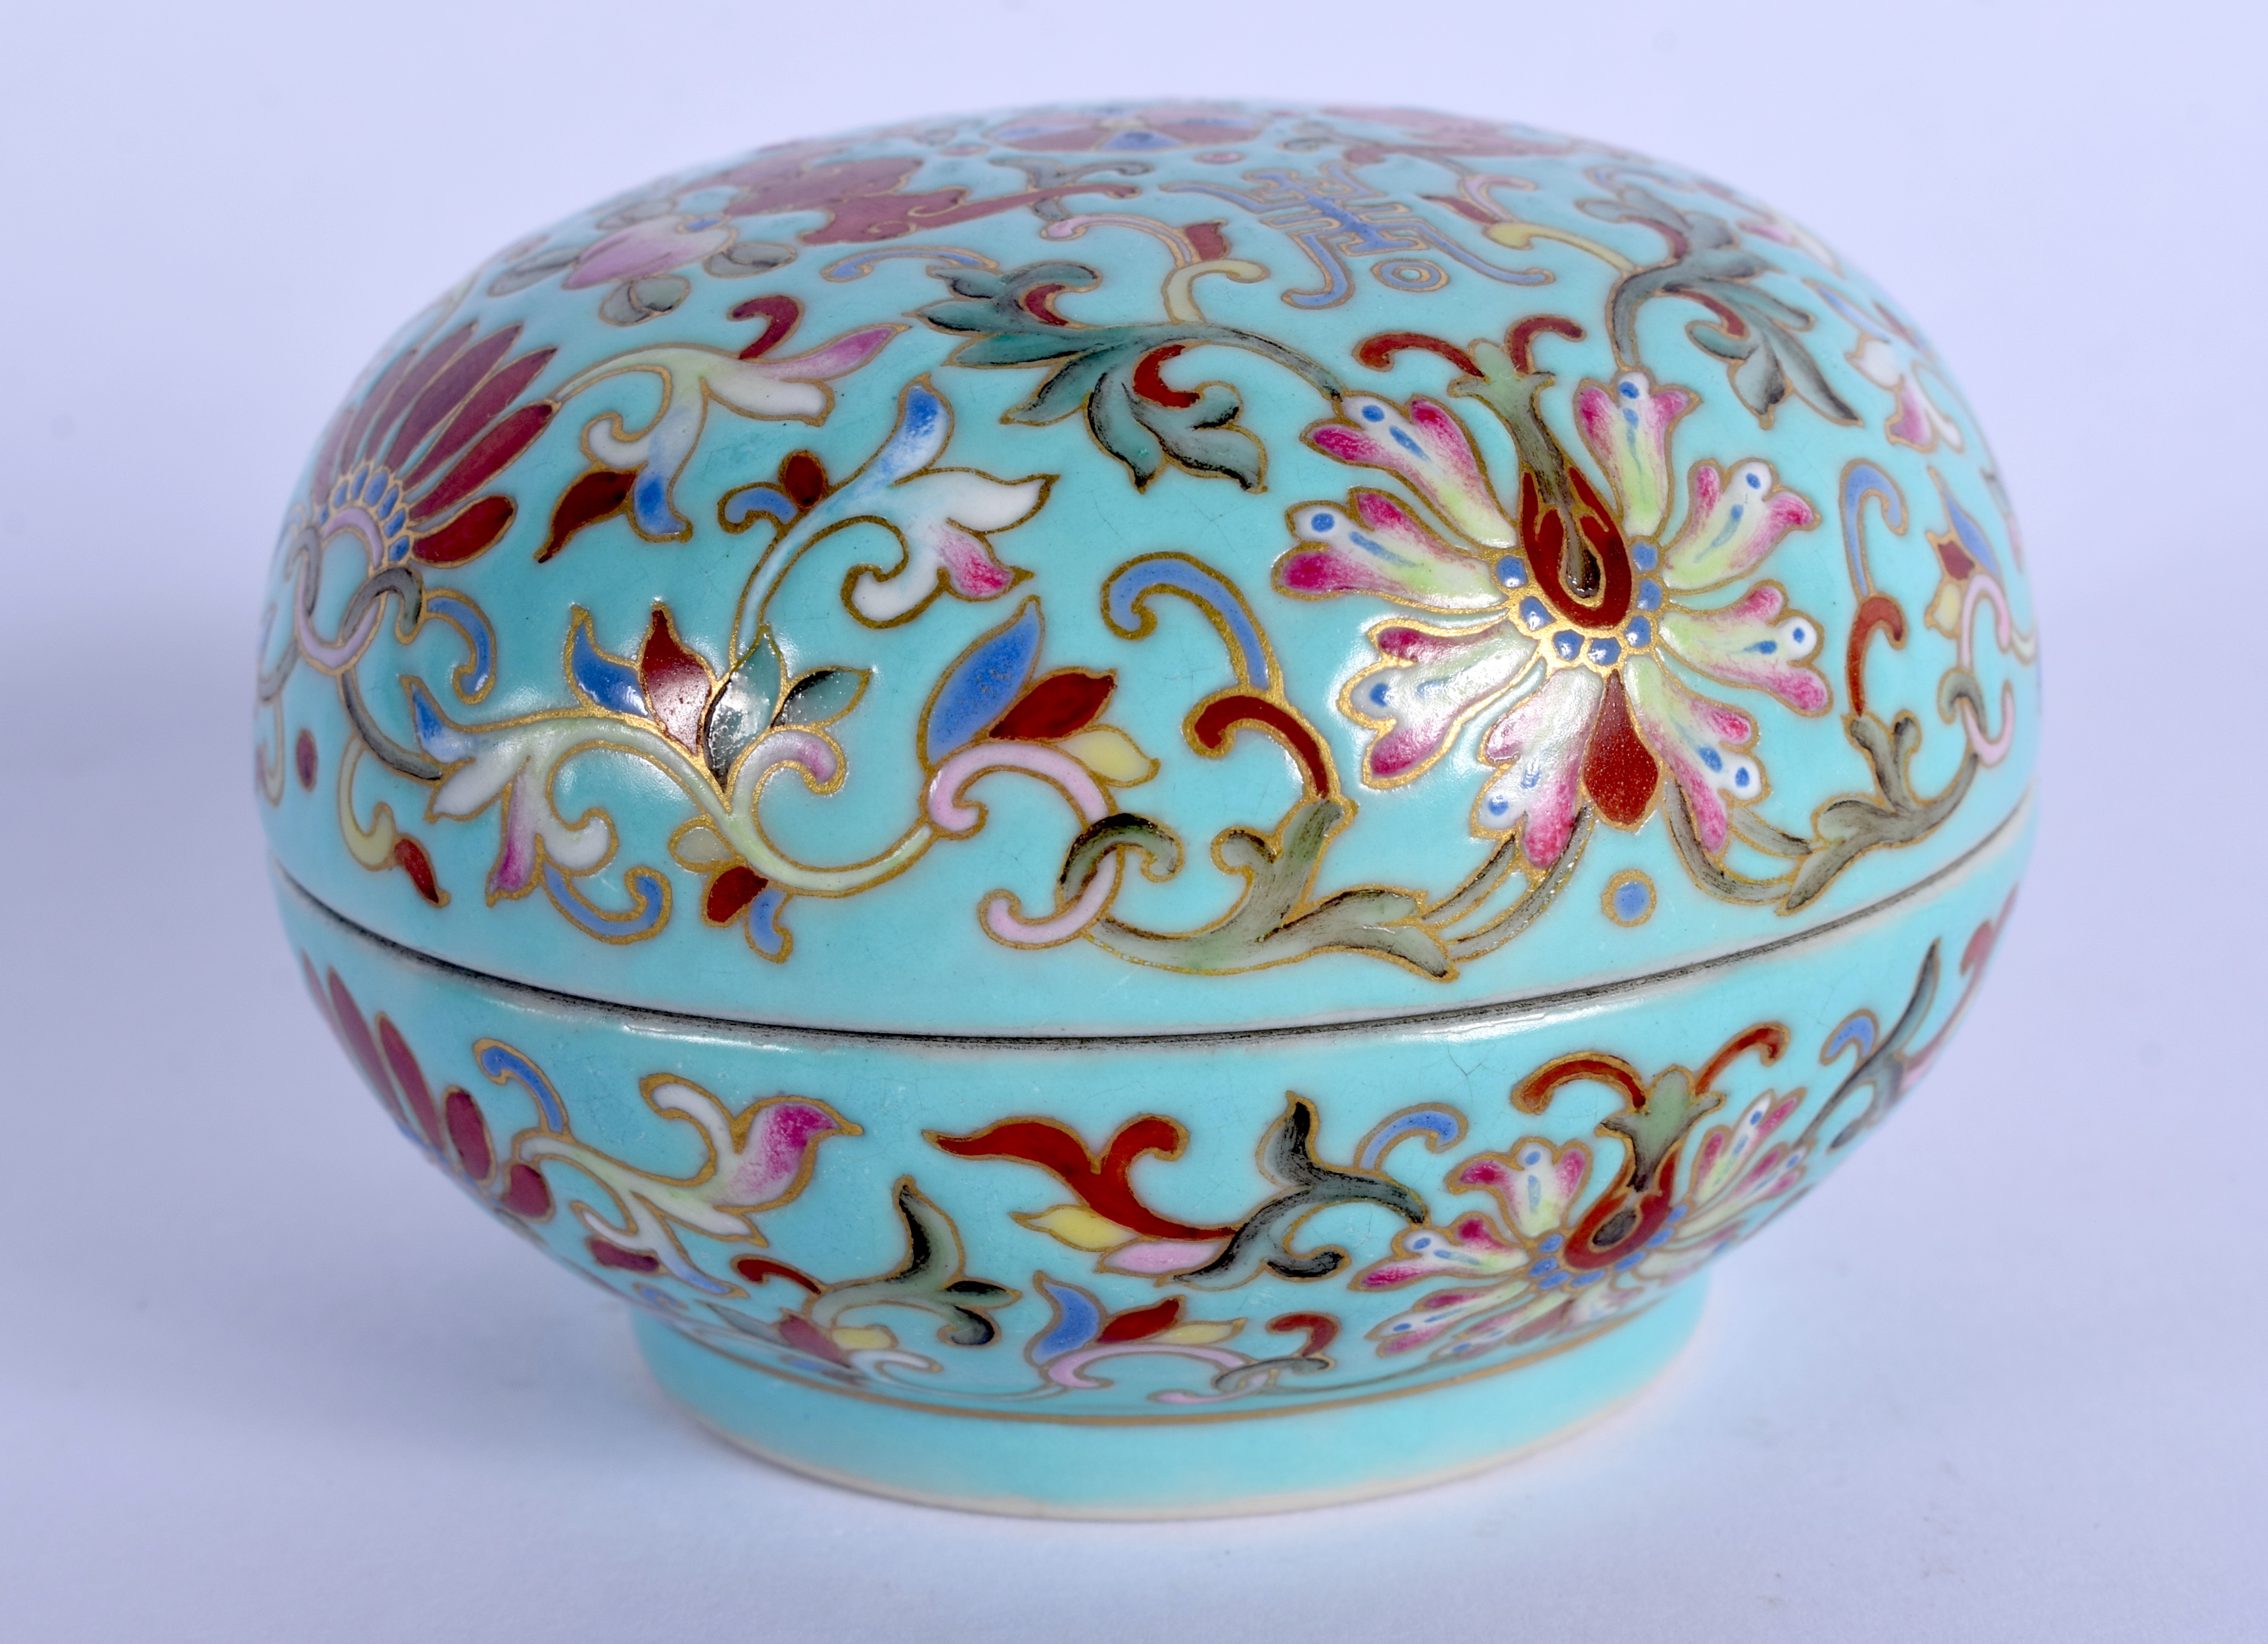 A 19TH CENTURY CHINESE PORCELAIN BOX AND COVER Qing, painted with flowers and vines. 6.75 cm diamete - Image 2 of 5